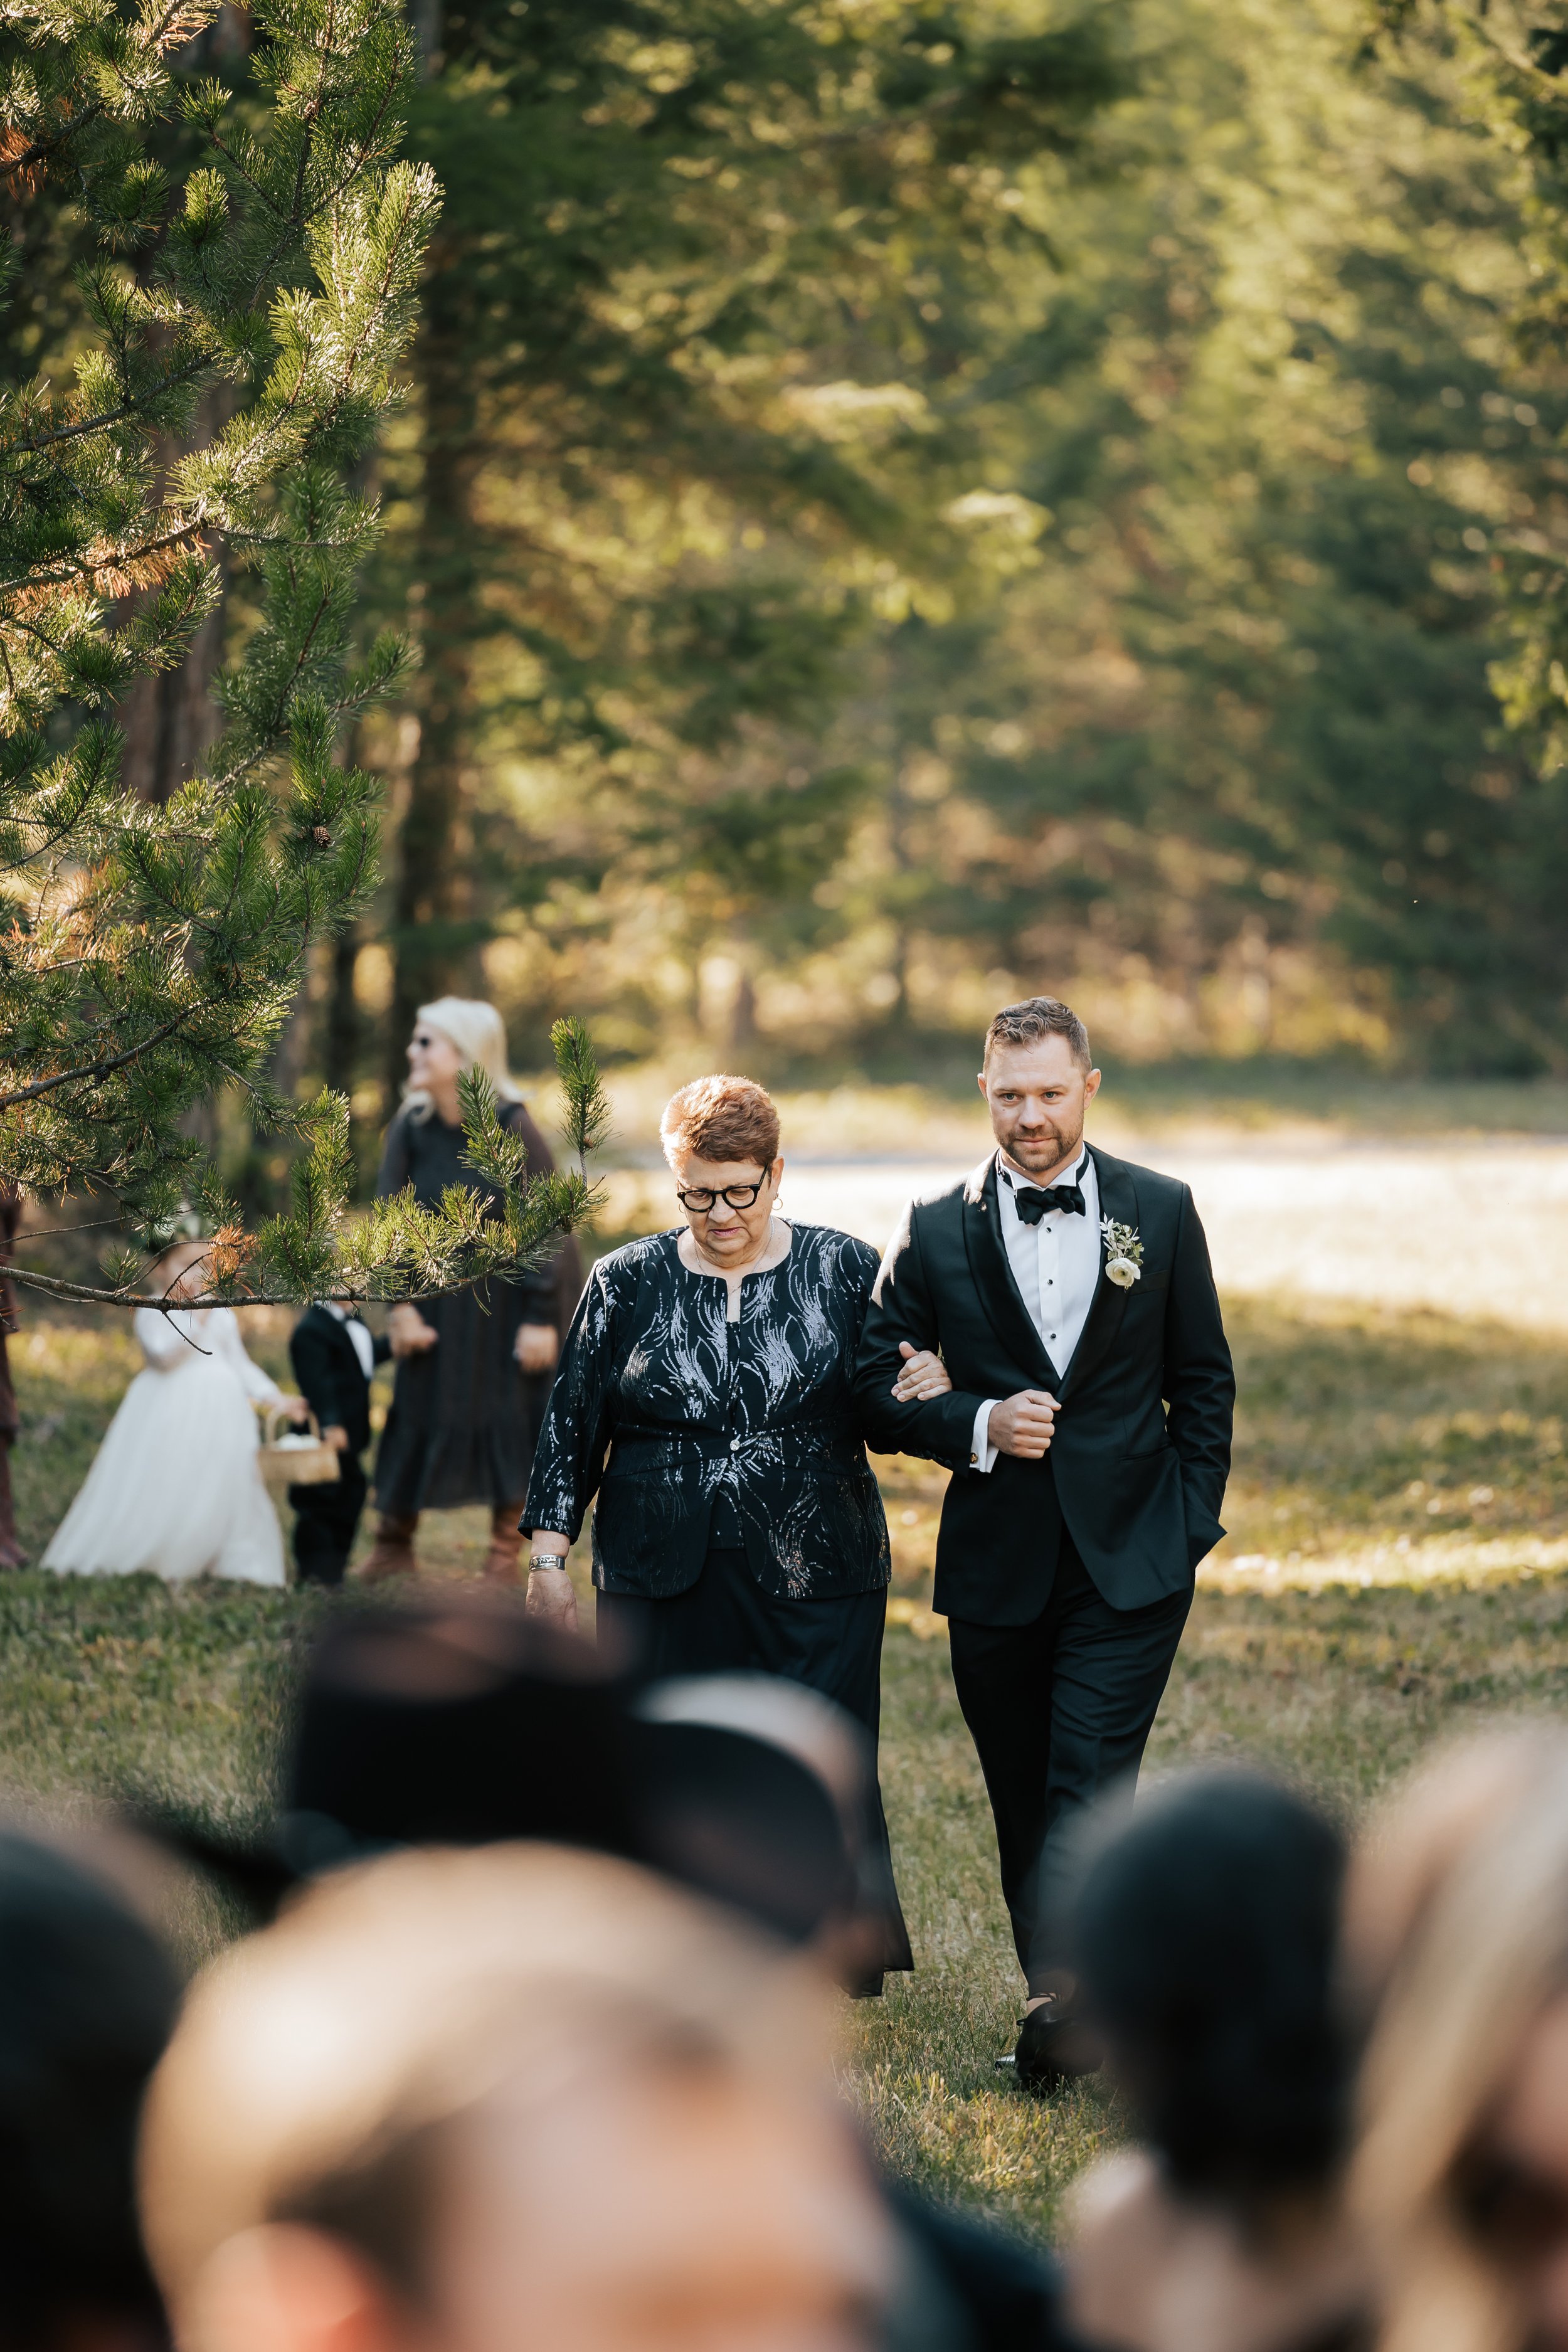  Groom walks down aisle with his mother as the wedding ceremony starts in Whitefish, Montana. Whitefish wedding. #montanawedding #weddingceremony  